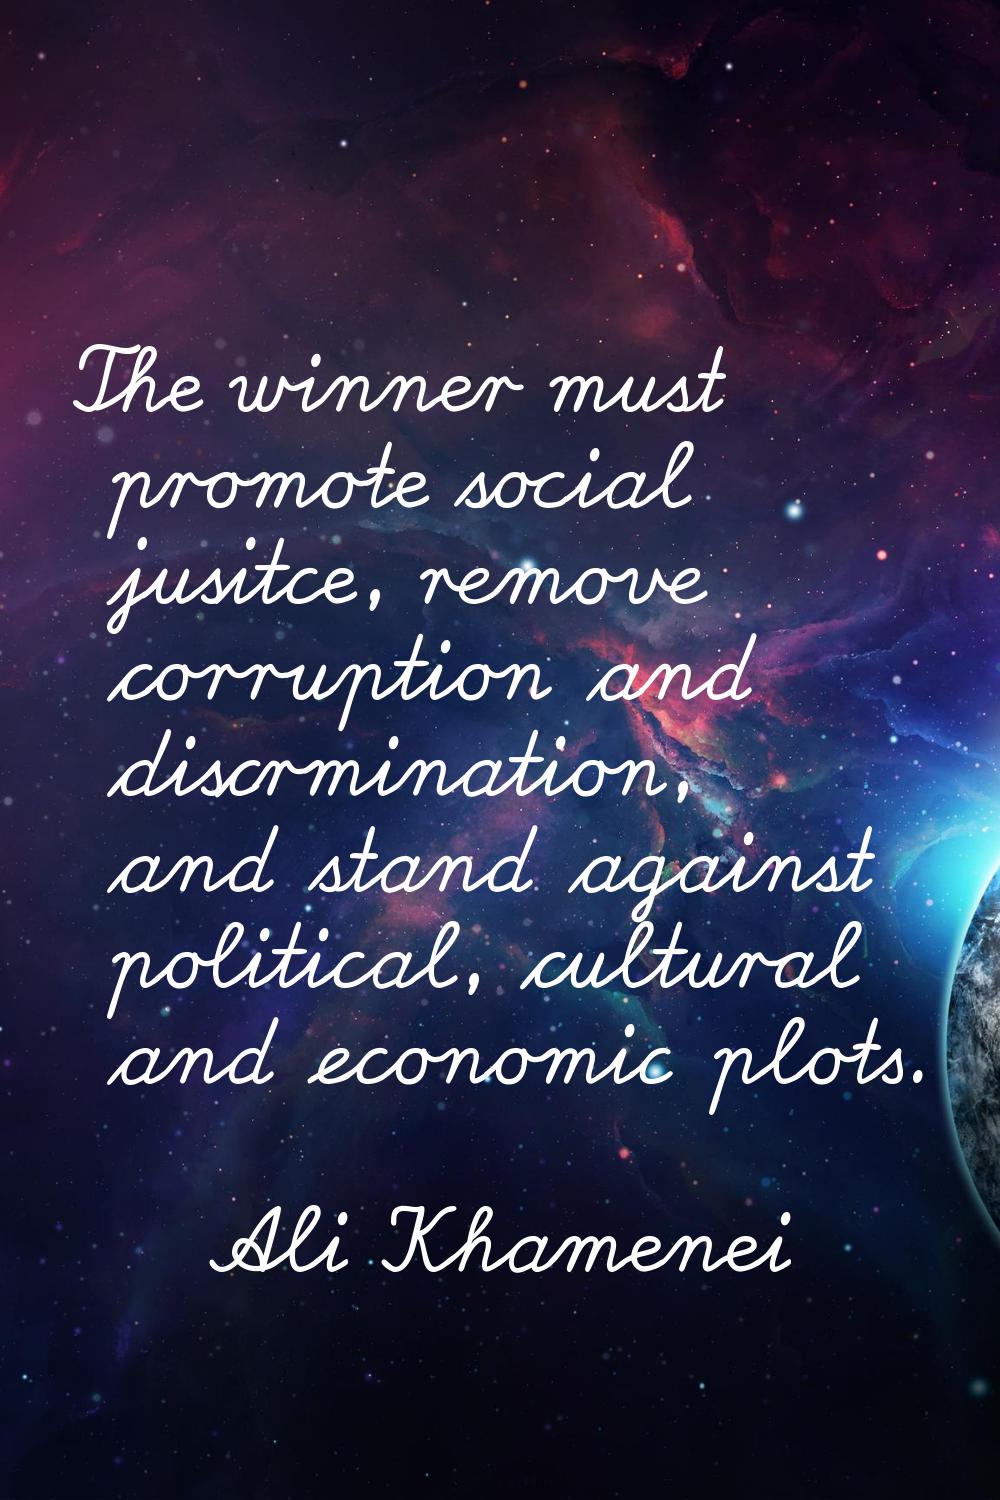 The winner must promote social jusitce, remove corruption and discrmination, and stand against poli